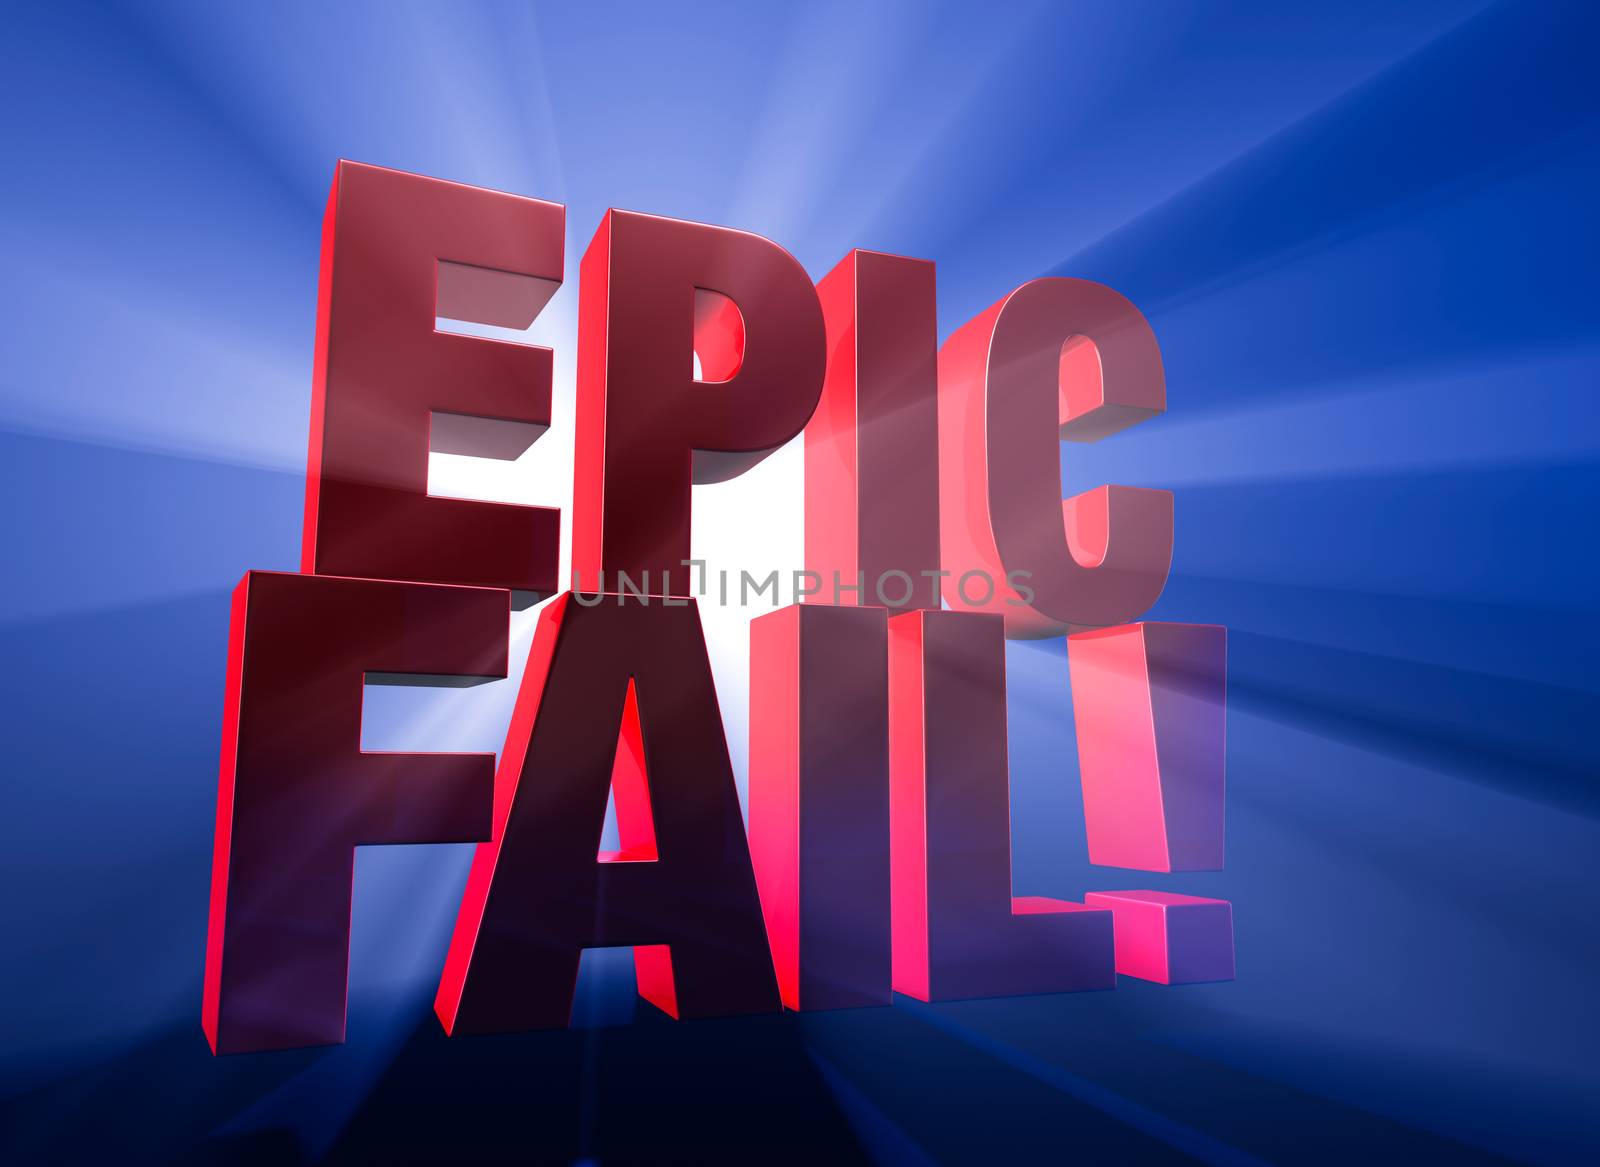 Viewed at a dramatic angle, a bold, red "EPIC FAIL!" stands on a dark blue background brilliantly backlit with light rays shining through.